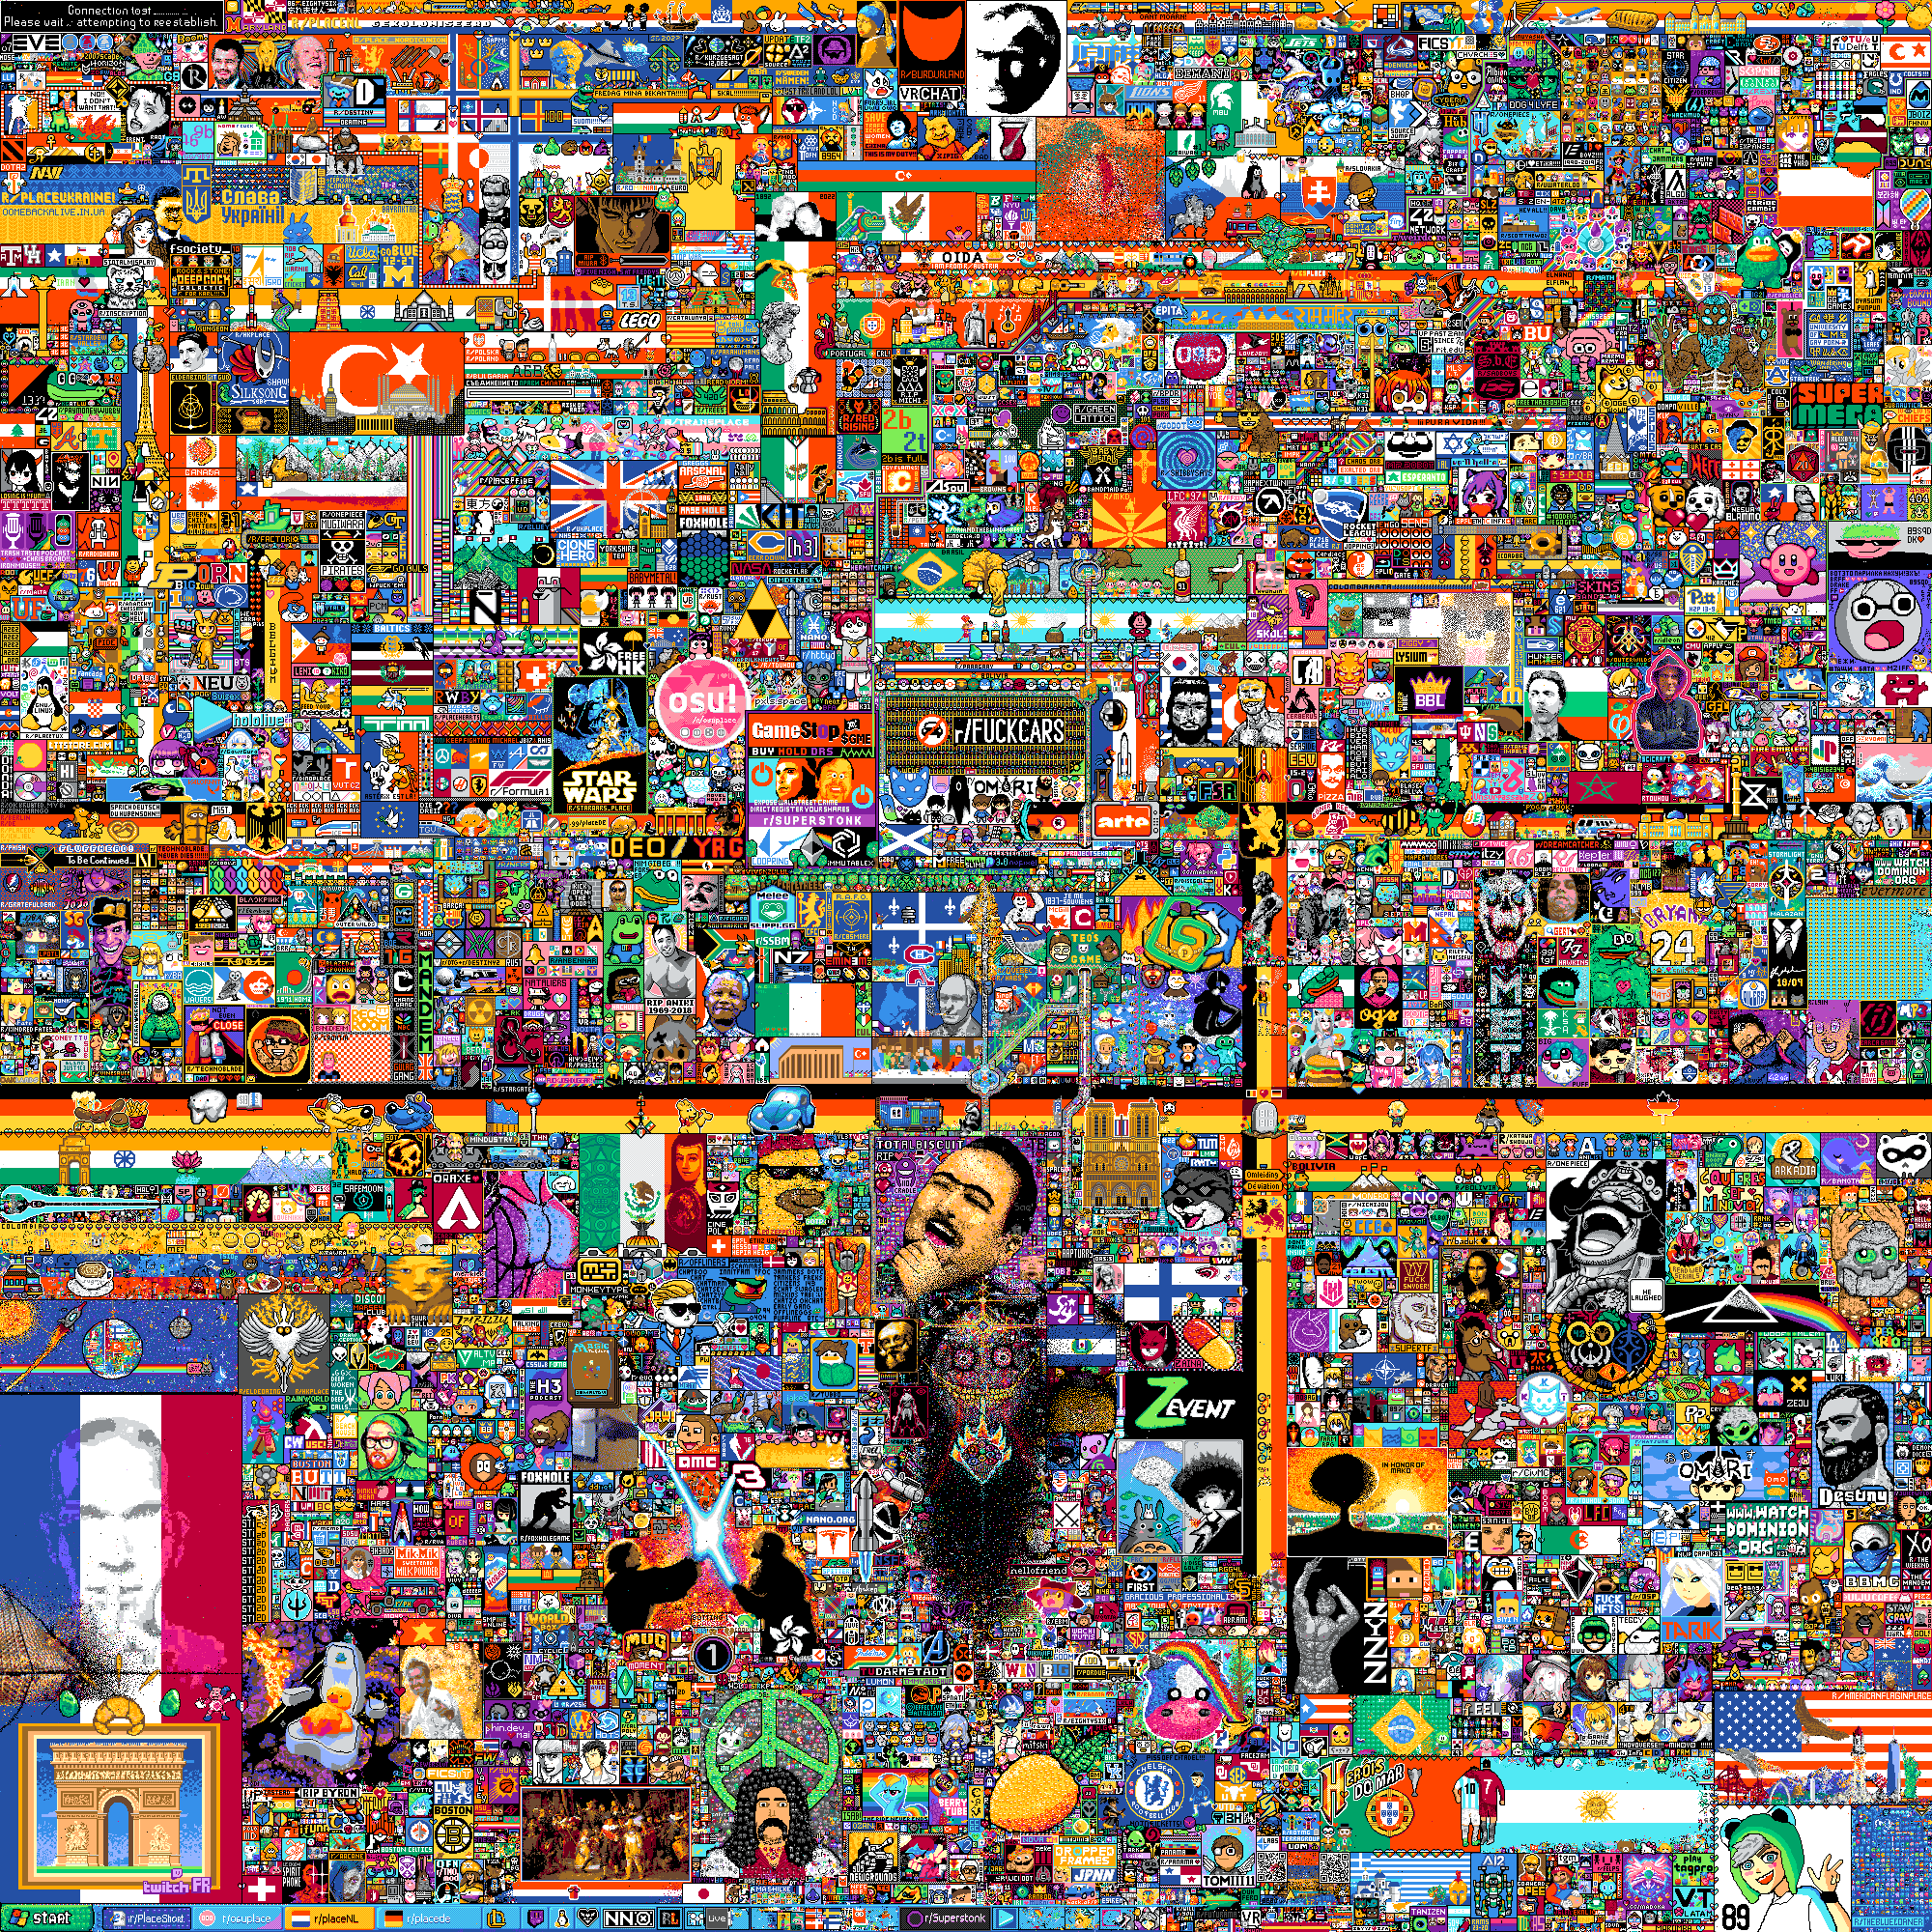 Canvas of /r/place in the state of when the experiment was concluded.